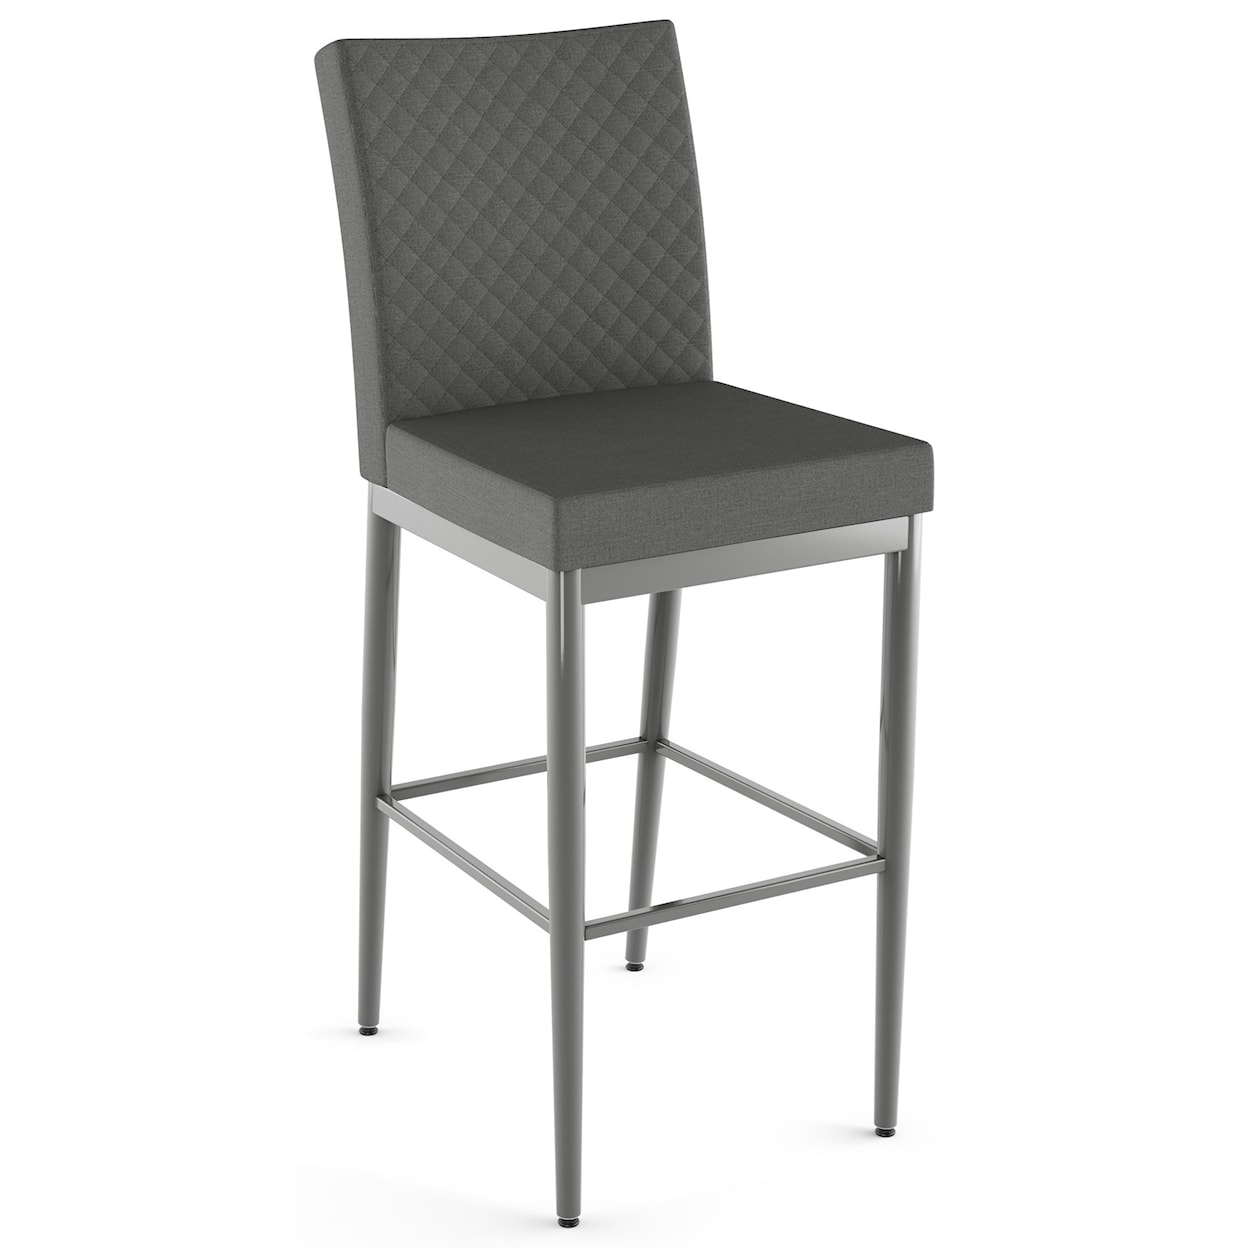 Amisco Urban 30" Melrose Bar Stool w/ Quilted Fabric